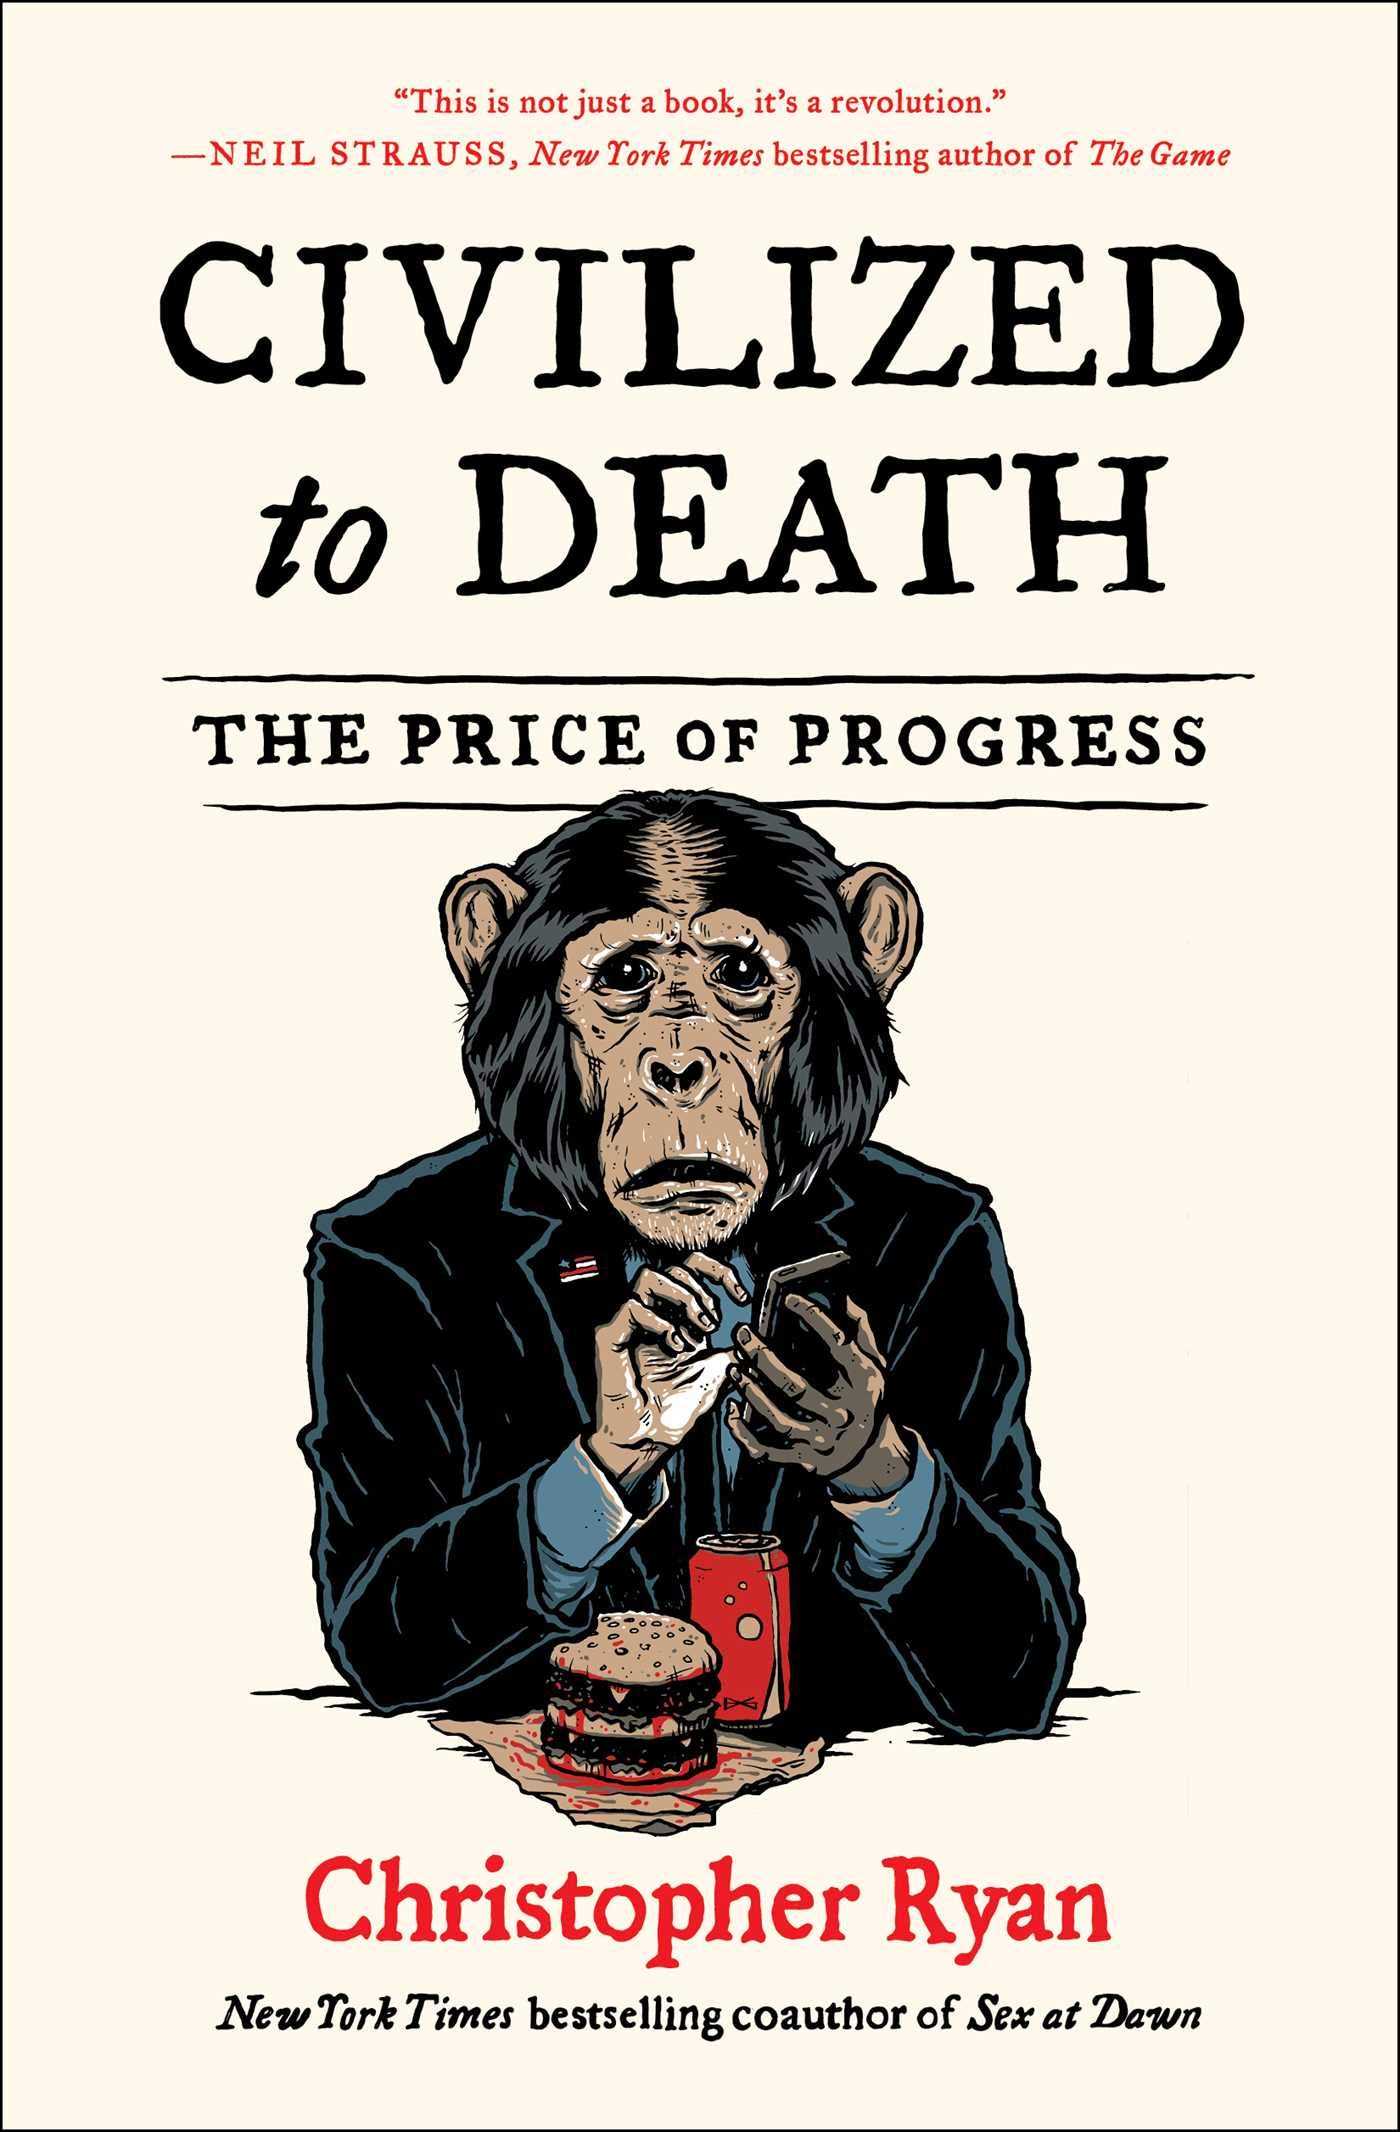 Civilized to Death: The Price of Progress (eBook) by Christopher Ryan $3.99